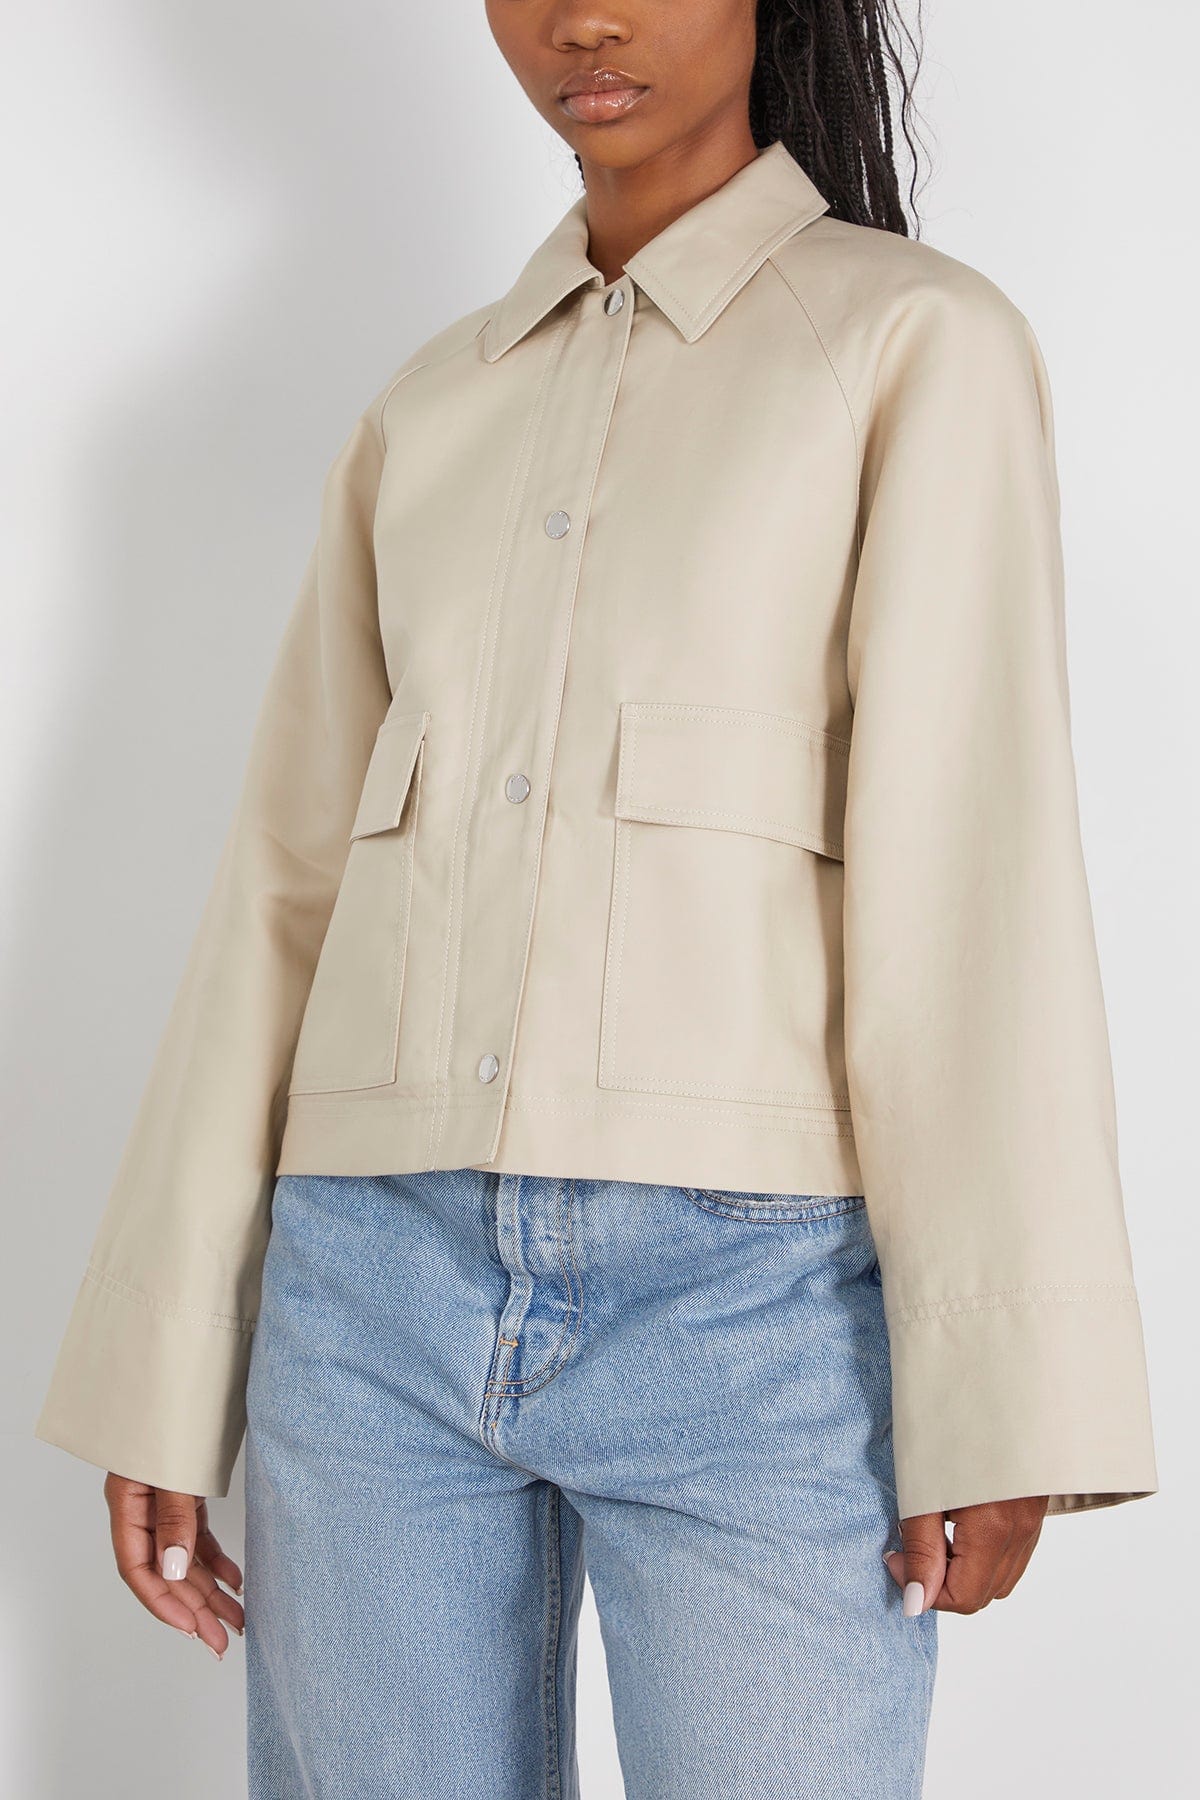 Toteme Jackets Cropped Cotton Jacket in Sand Toteme Cropped Cotton Jacket in Sand